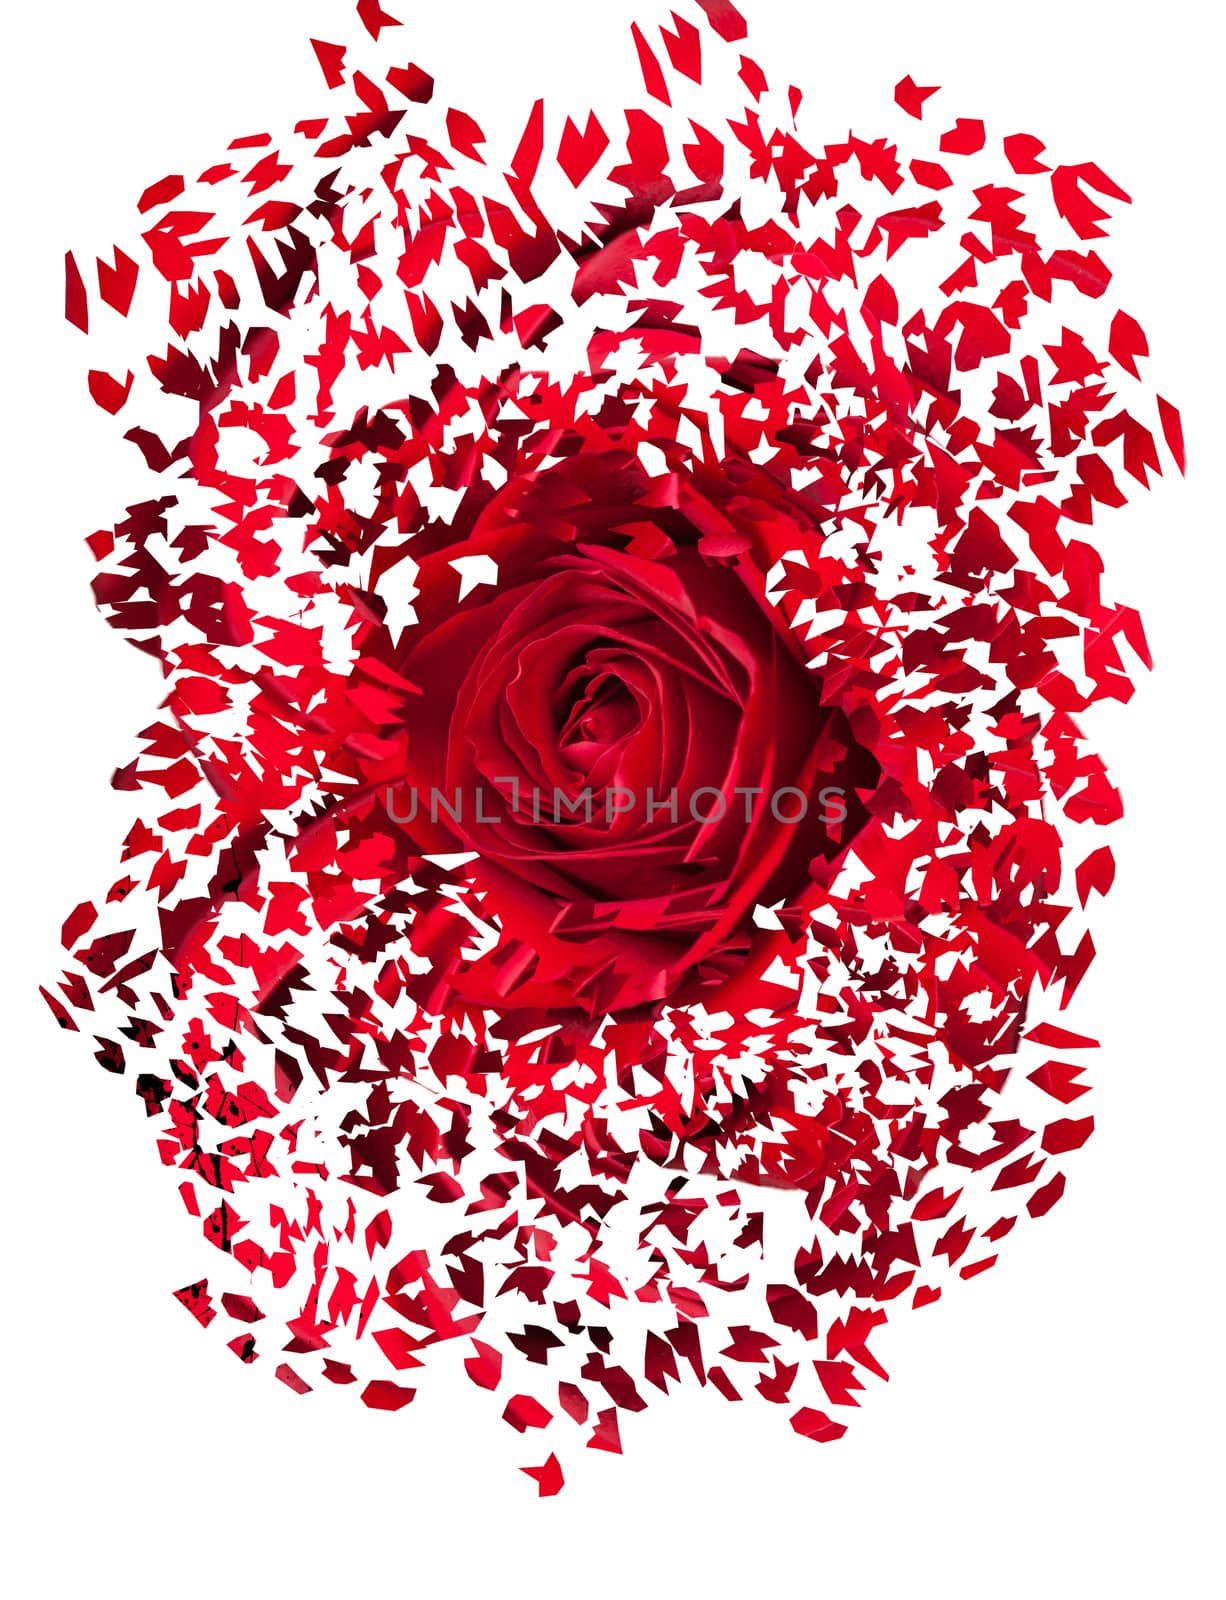 Detailed close shot of velvet red rose breaking into many pieces to suggest either a breakup or perhaps excitement as the rose devolves into abstract illustration